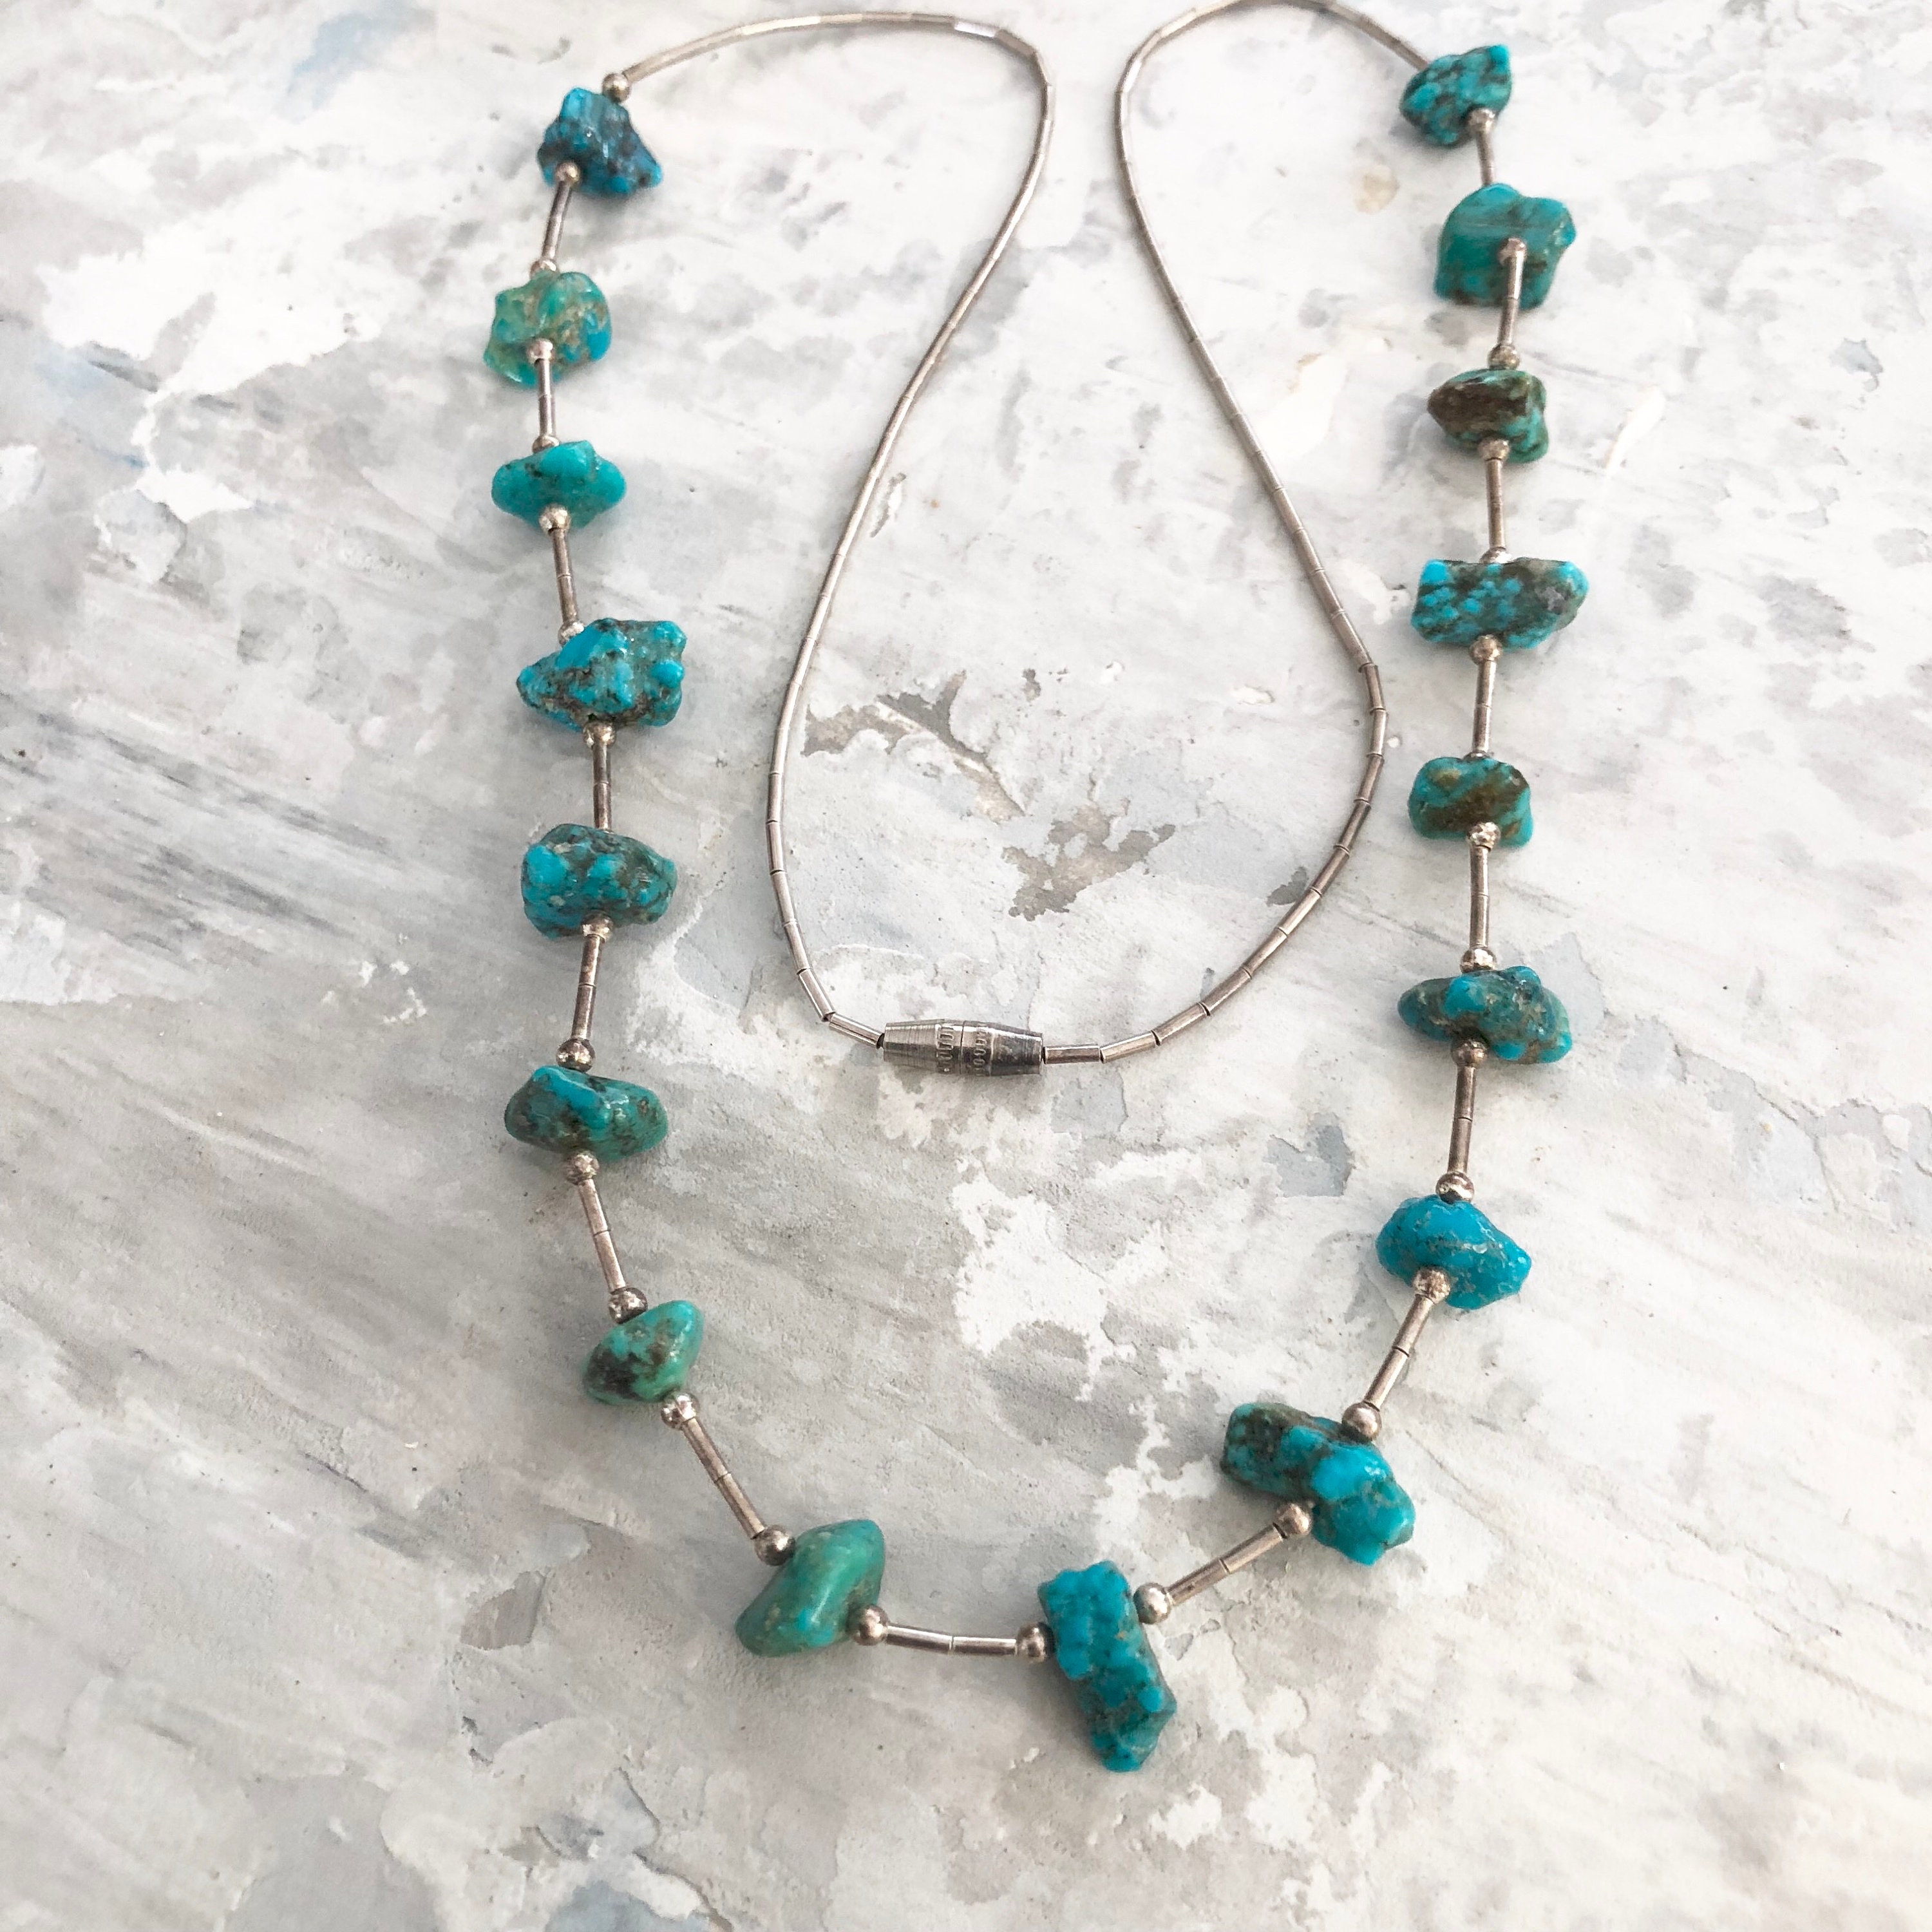 Vintage navajo liquid silver and turquoise nugget necklace